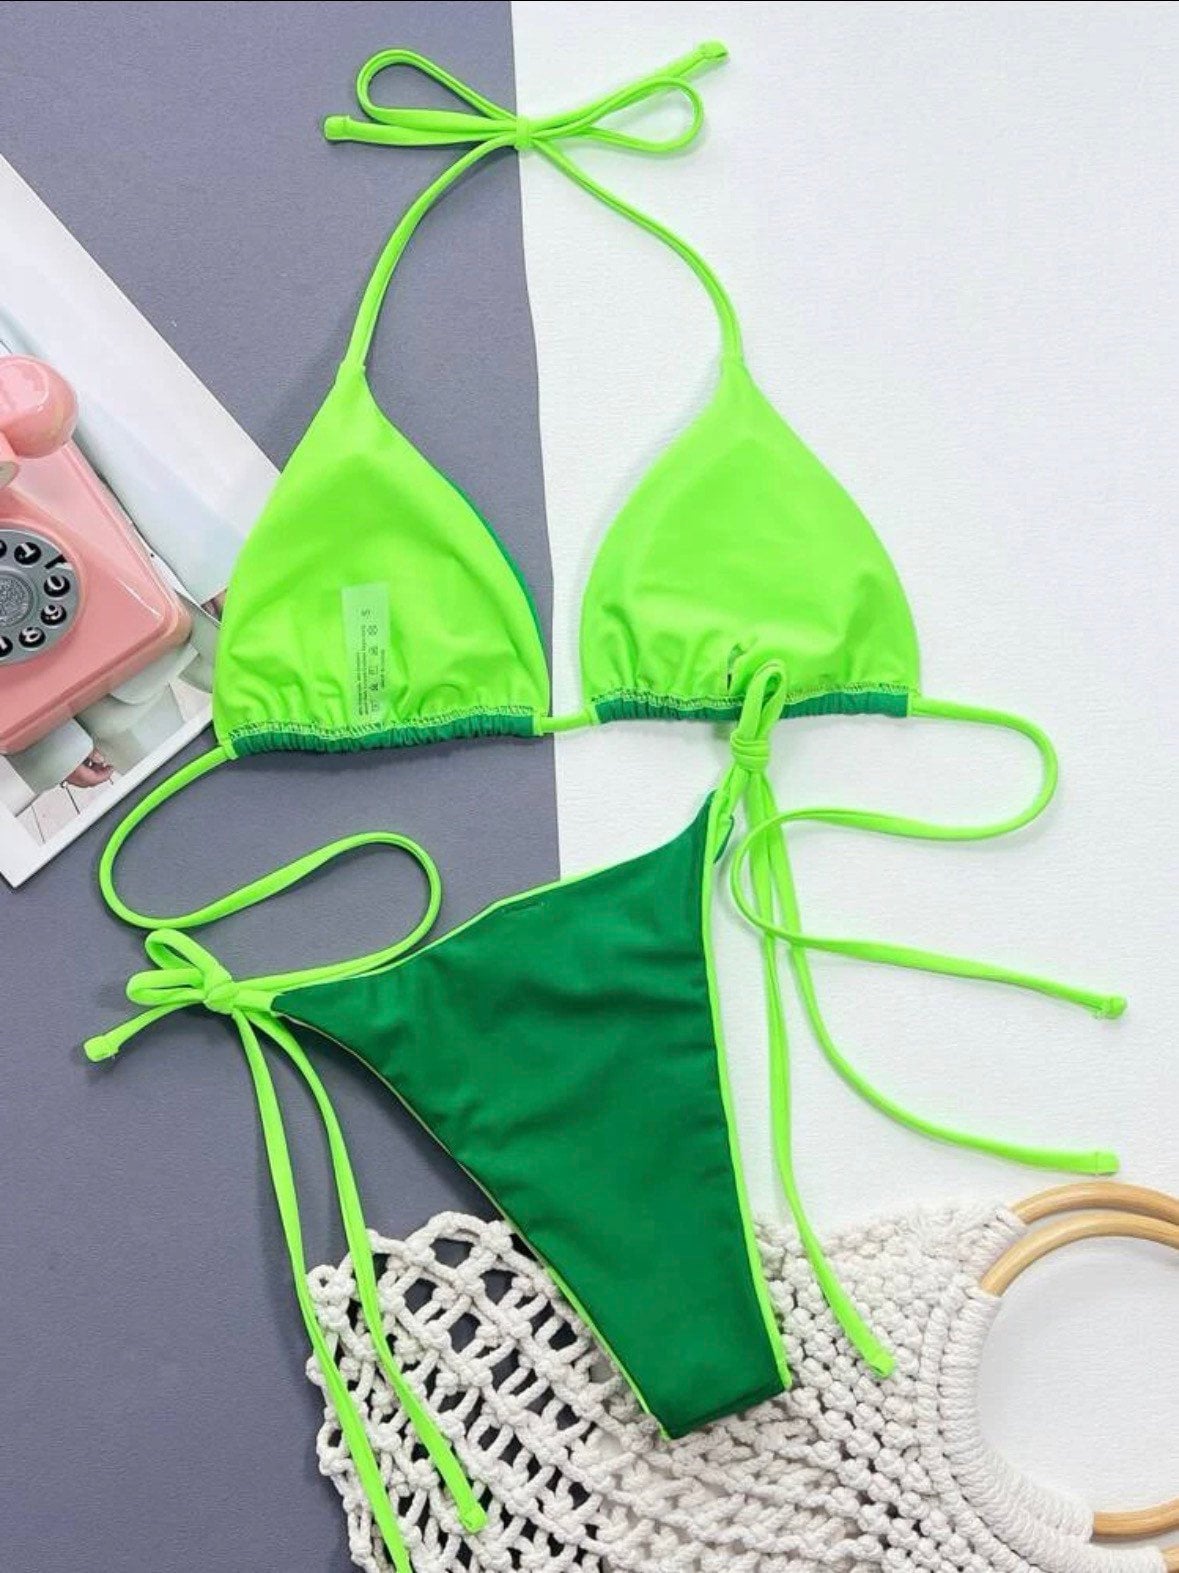 The Two Tone Valeria Green/Neon Green swim bikini with tie sides and solid green print triangle halter top tie and bottoms swimsuit set